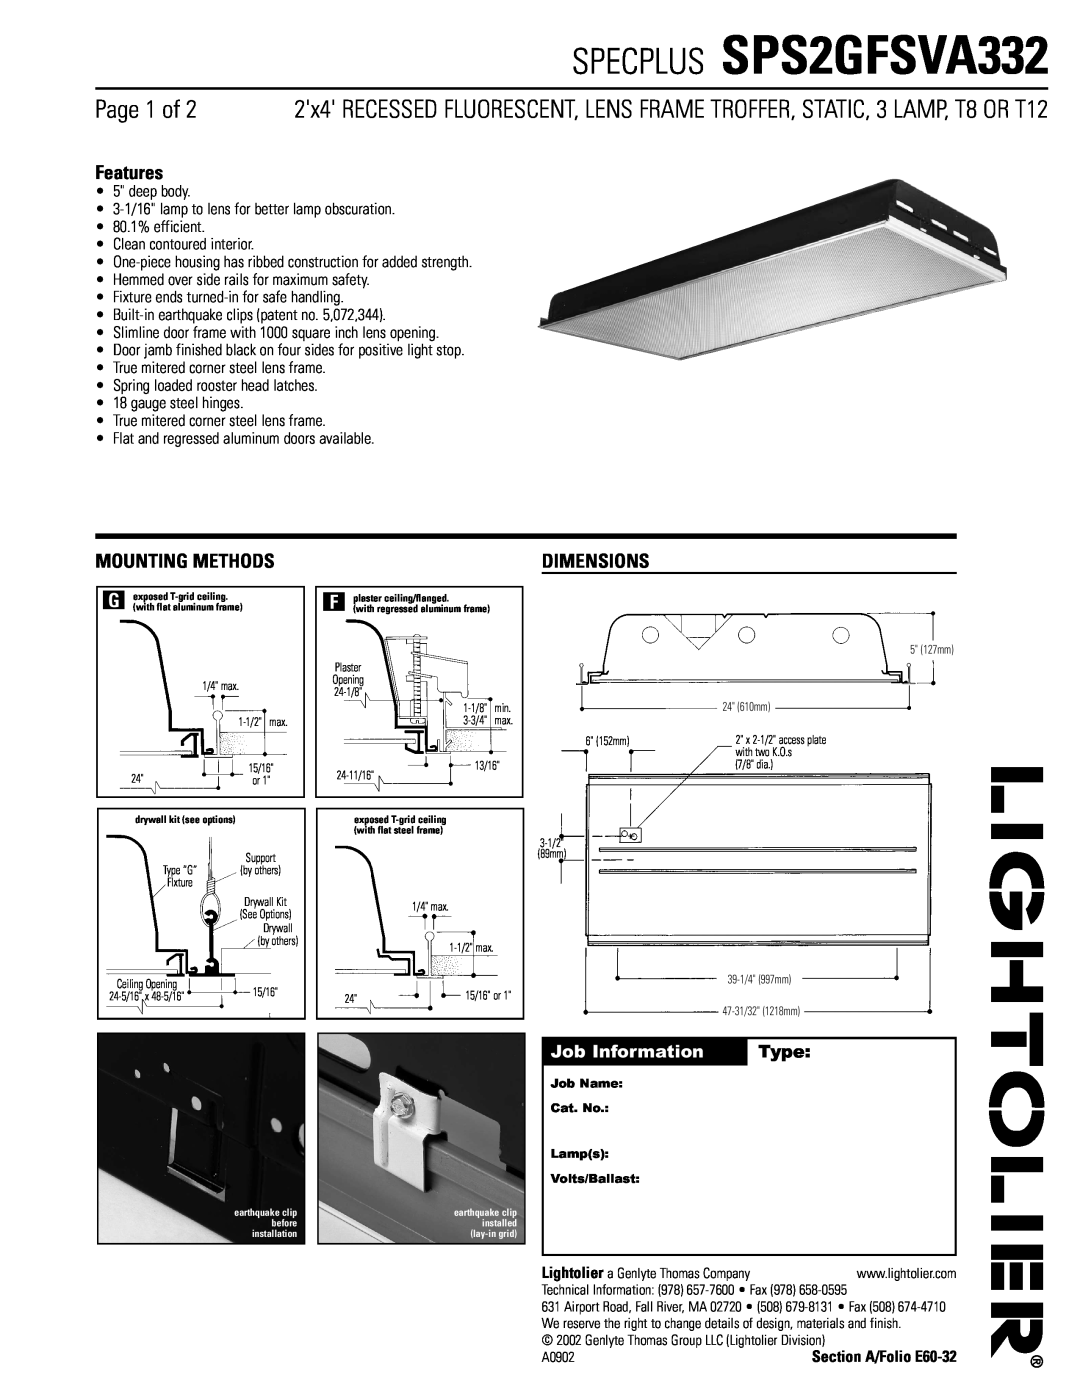 Lightolier dimensions SPECPLUS SPS2GFSVA332, Page 1 of, Features, Mounting Methods, Dimensions, Job Information, Type 